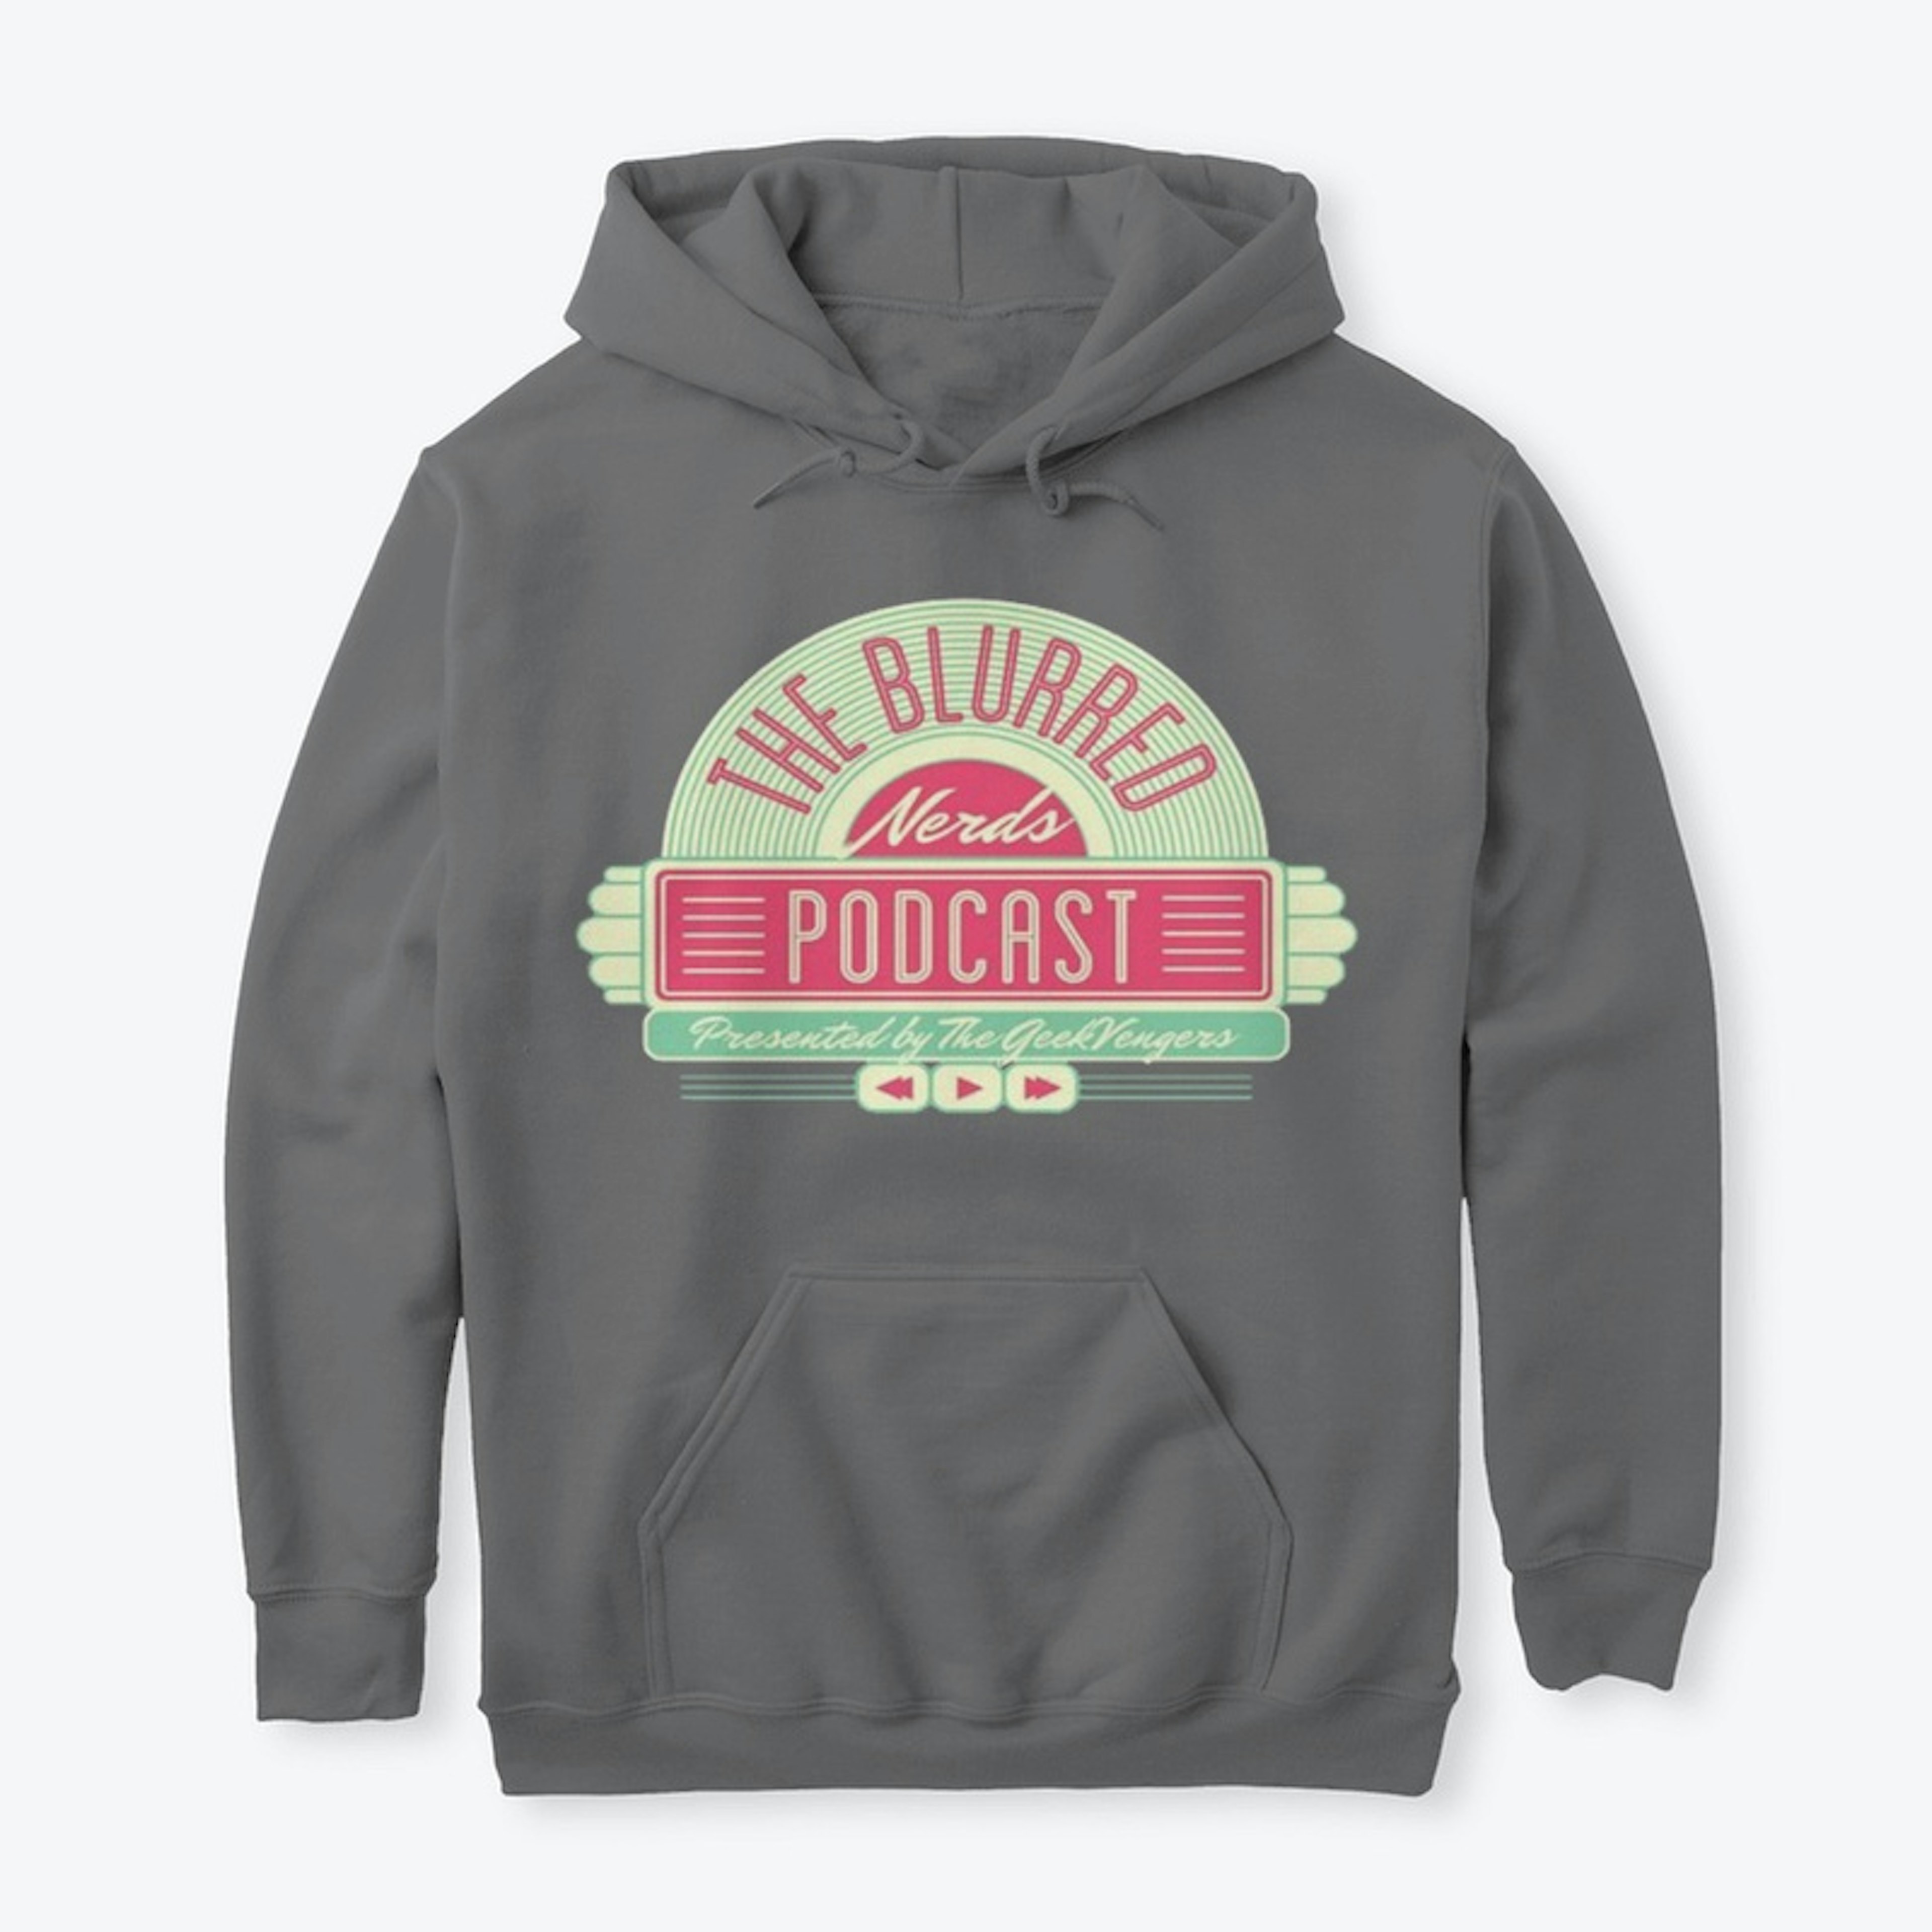 The Blurred Nerds Hoodie of Justice!